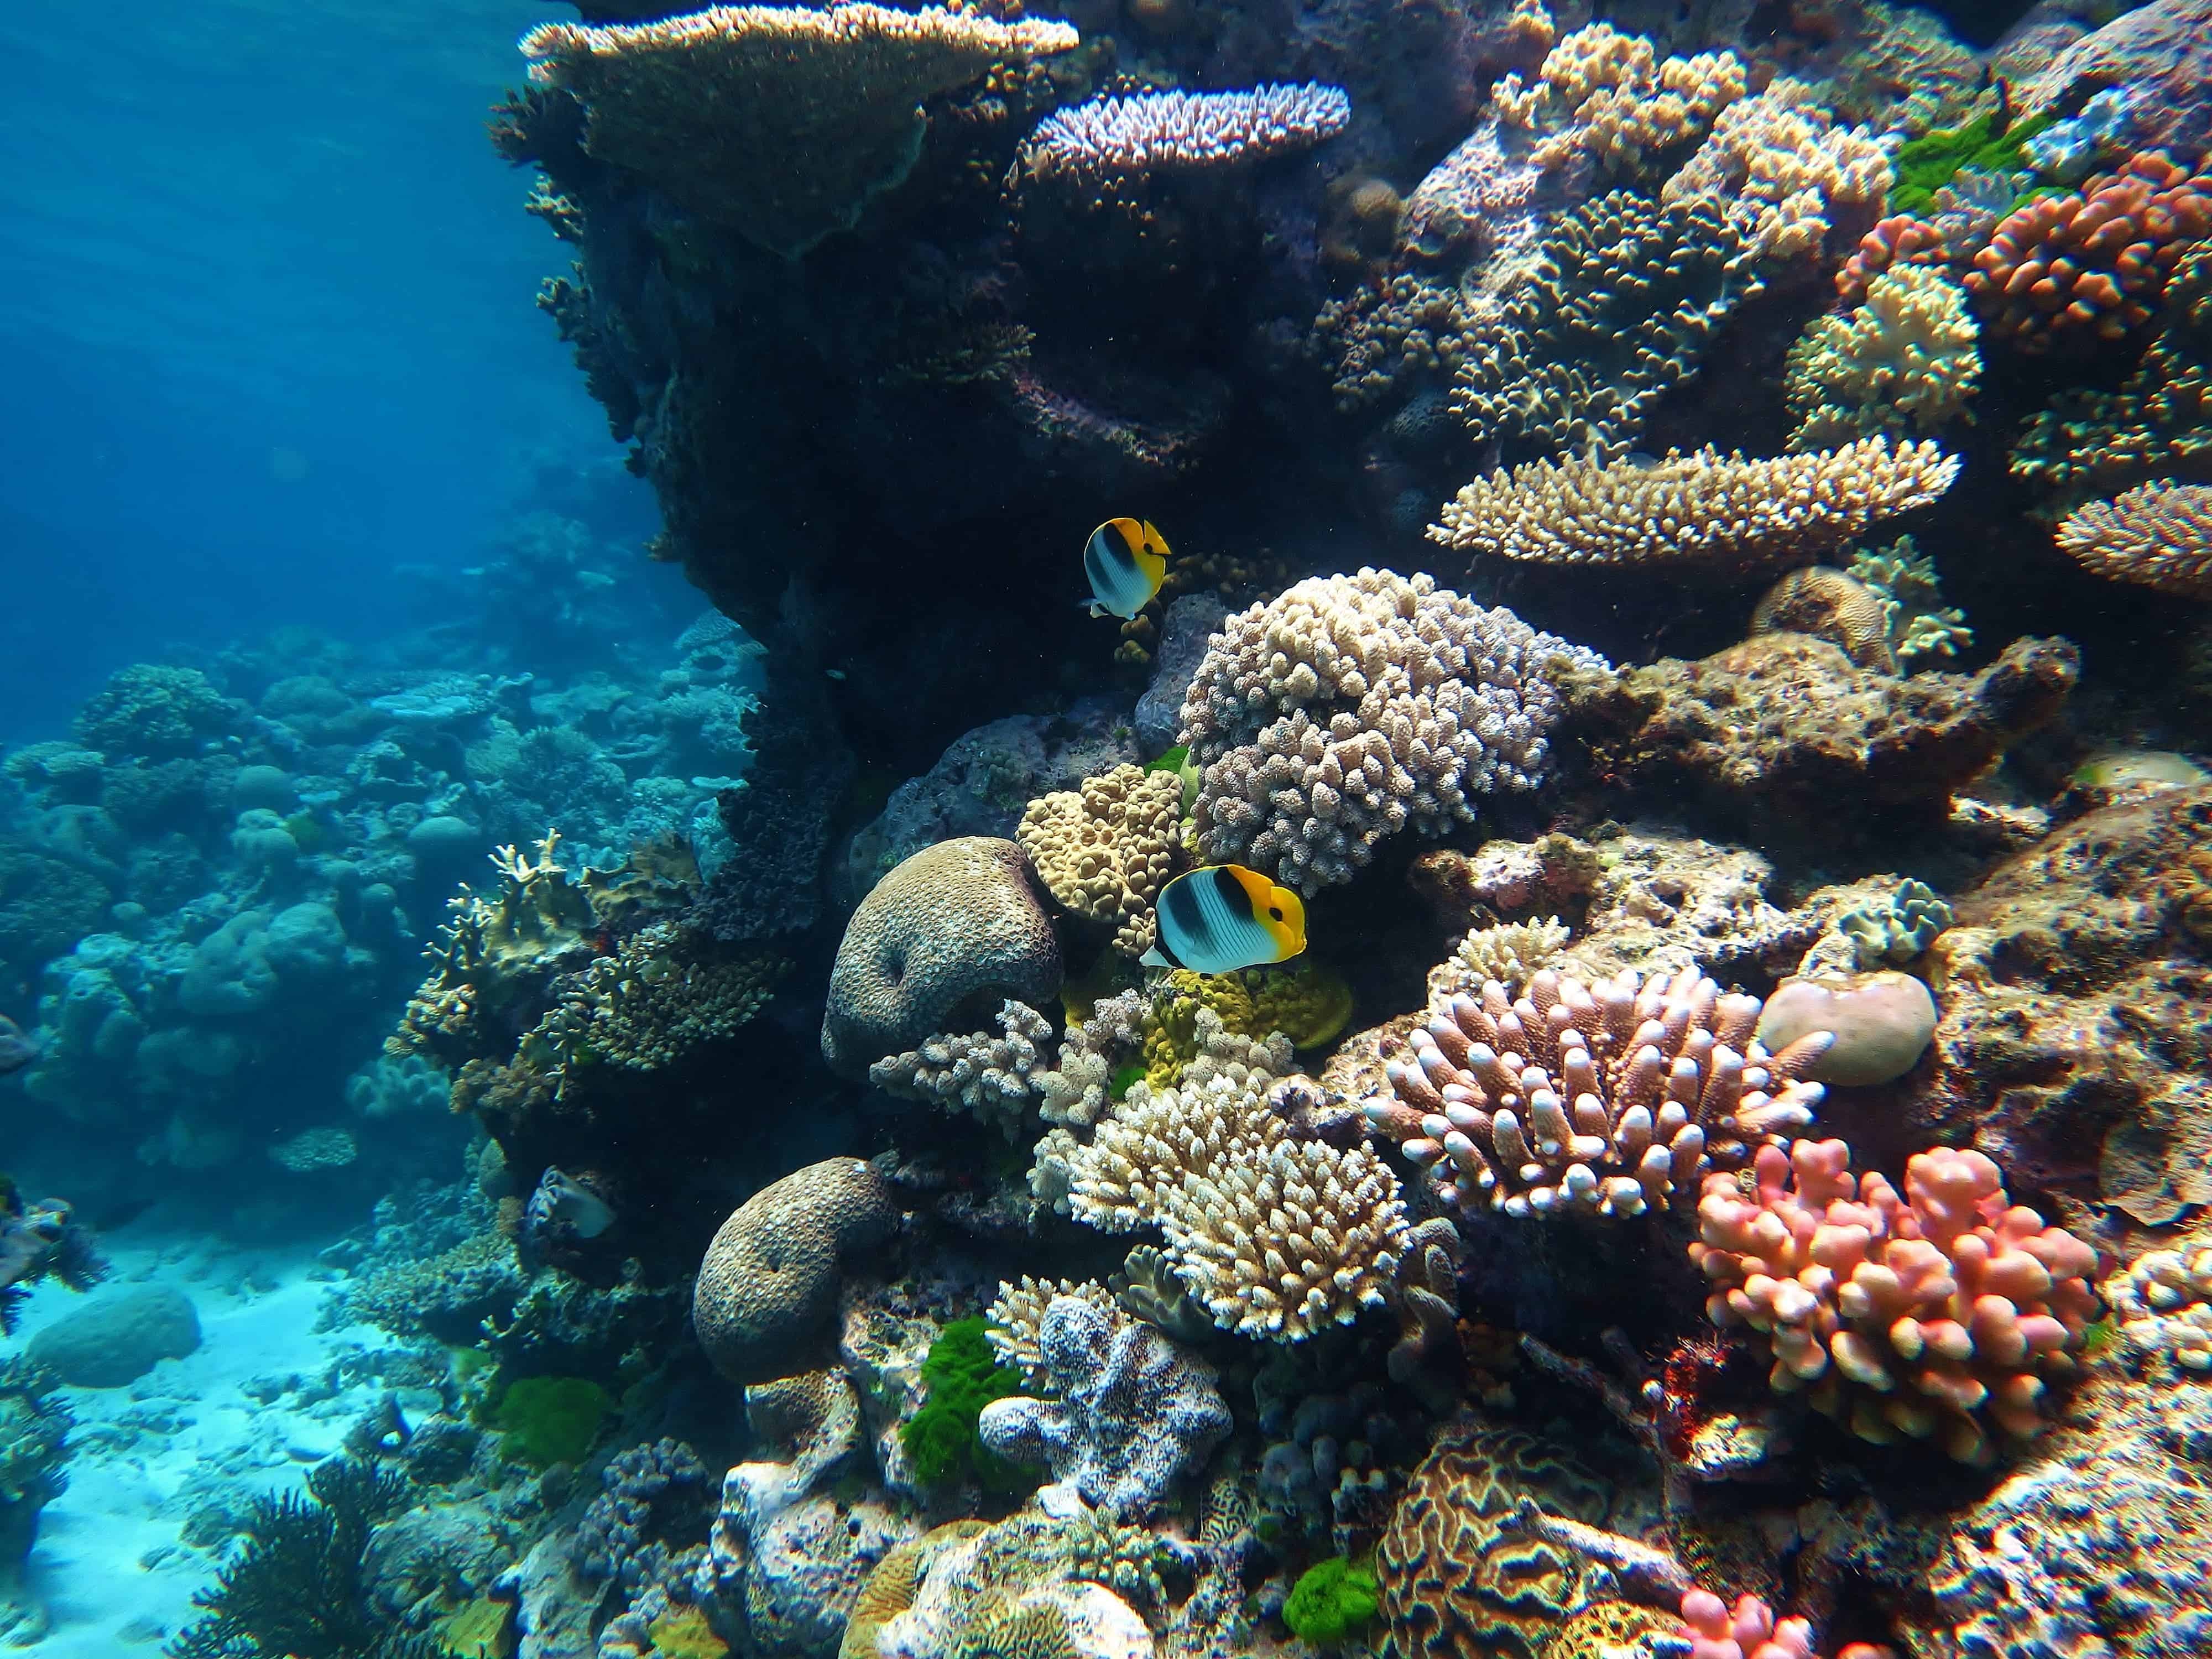 Coral Reef Images Info.